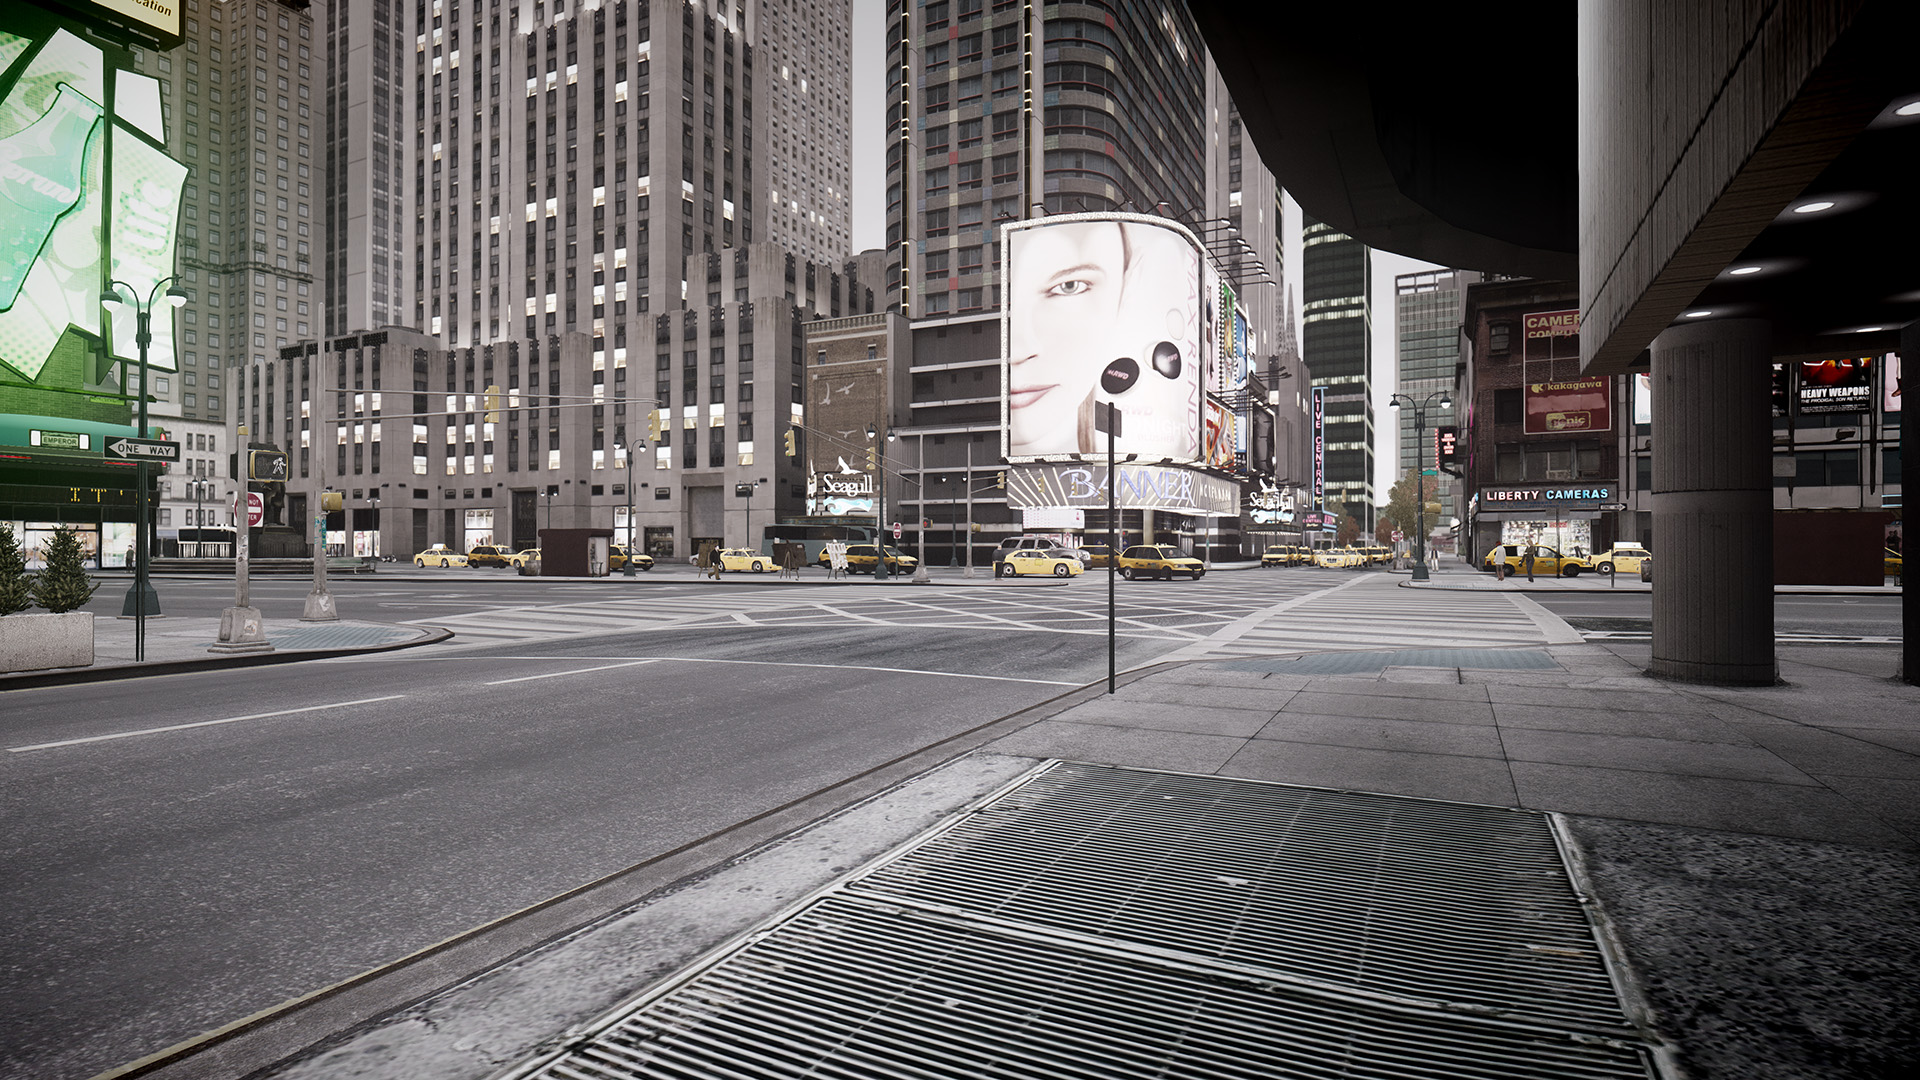 Gta Iv Modders Push Graphics Engine Harder Than Ever With 4k Makeover